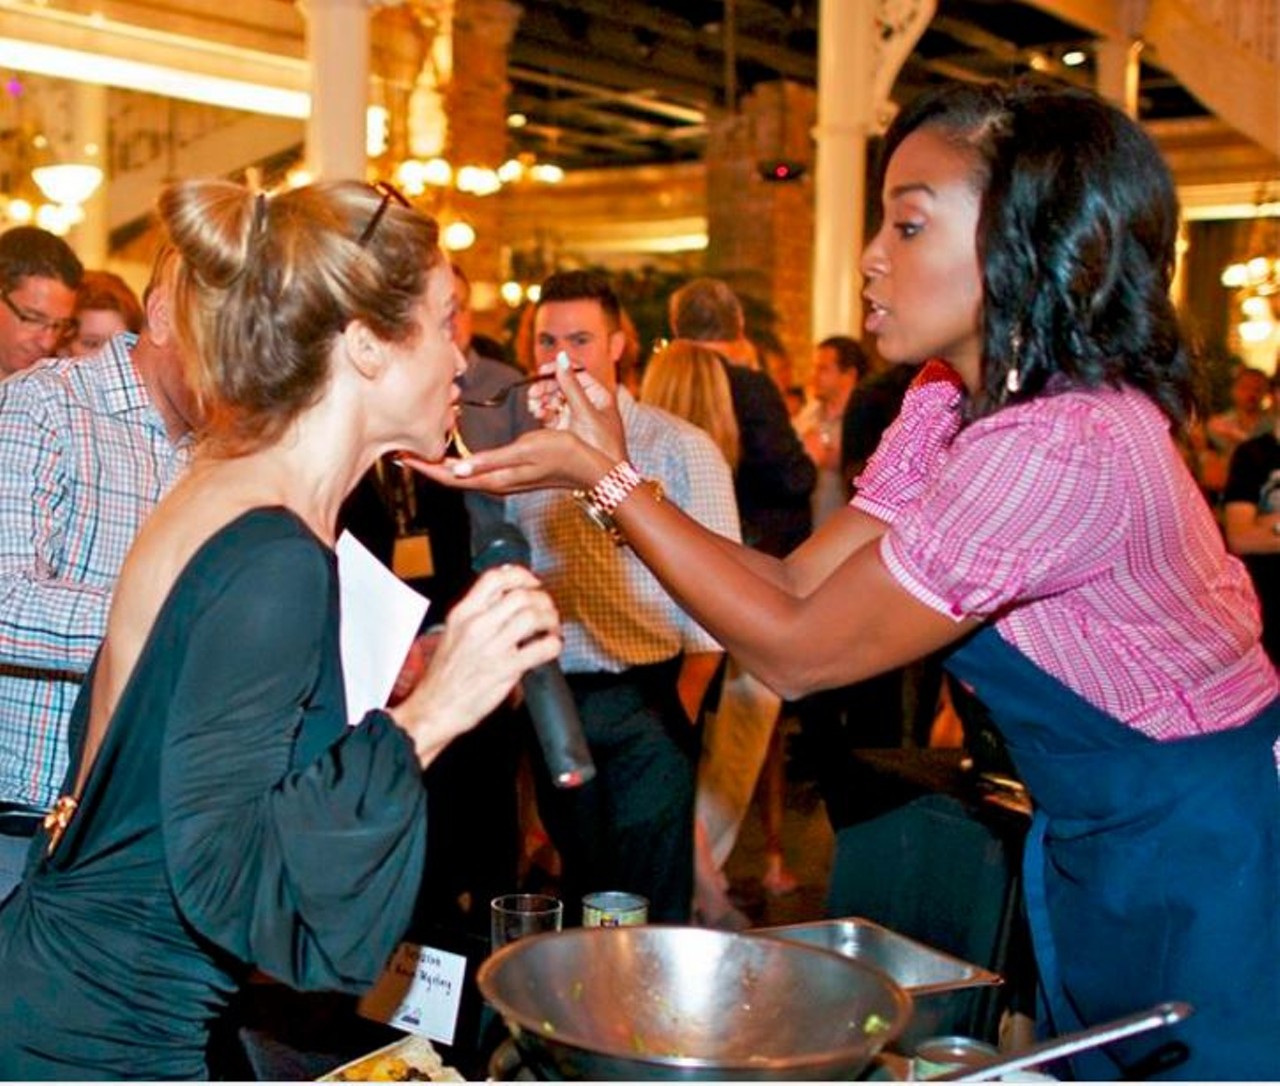 Monday, June 26
Bite Night&nbsp;Sample tastings from top local restaurants while enjoying live entertainment and cooking demonstrations. 7 pm;&nbsp;The Orchid Garden, 122 W. Church St.; $40-$65; bitenightorlando.com.
Photo via Thuyvi Gates & Nick Oliver/ Orlando Weekly